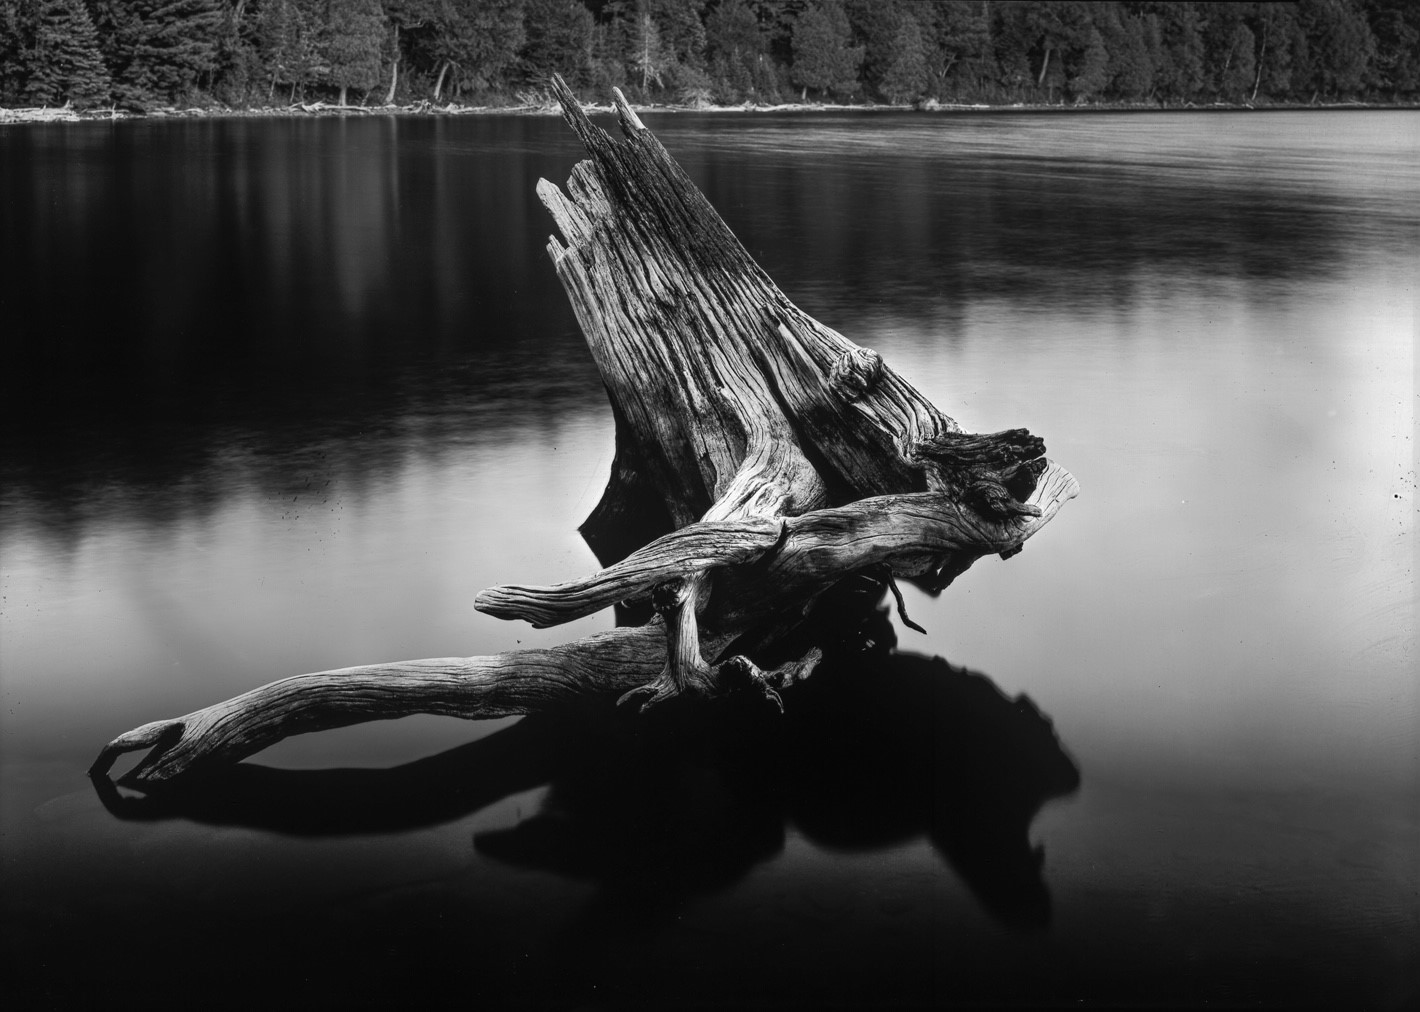 Weathering the Shallows - A 5x7 paper negative shot by Don Kittle on ILFORD Mutigrade paper